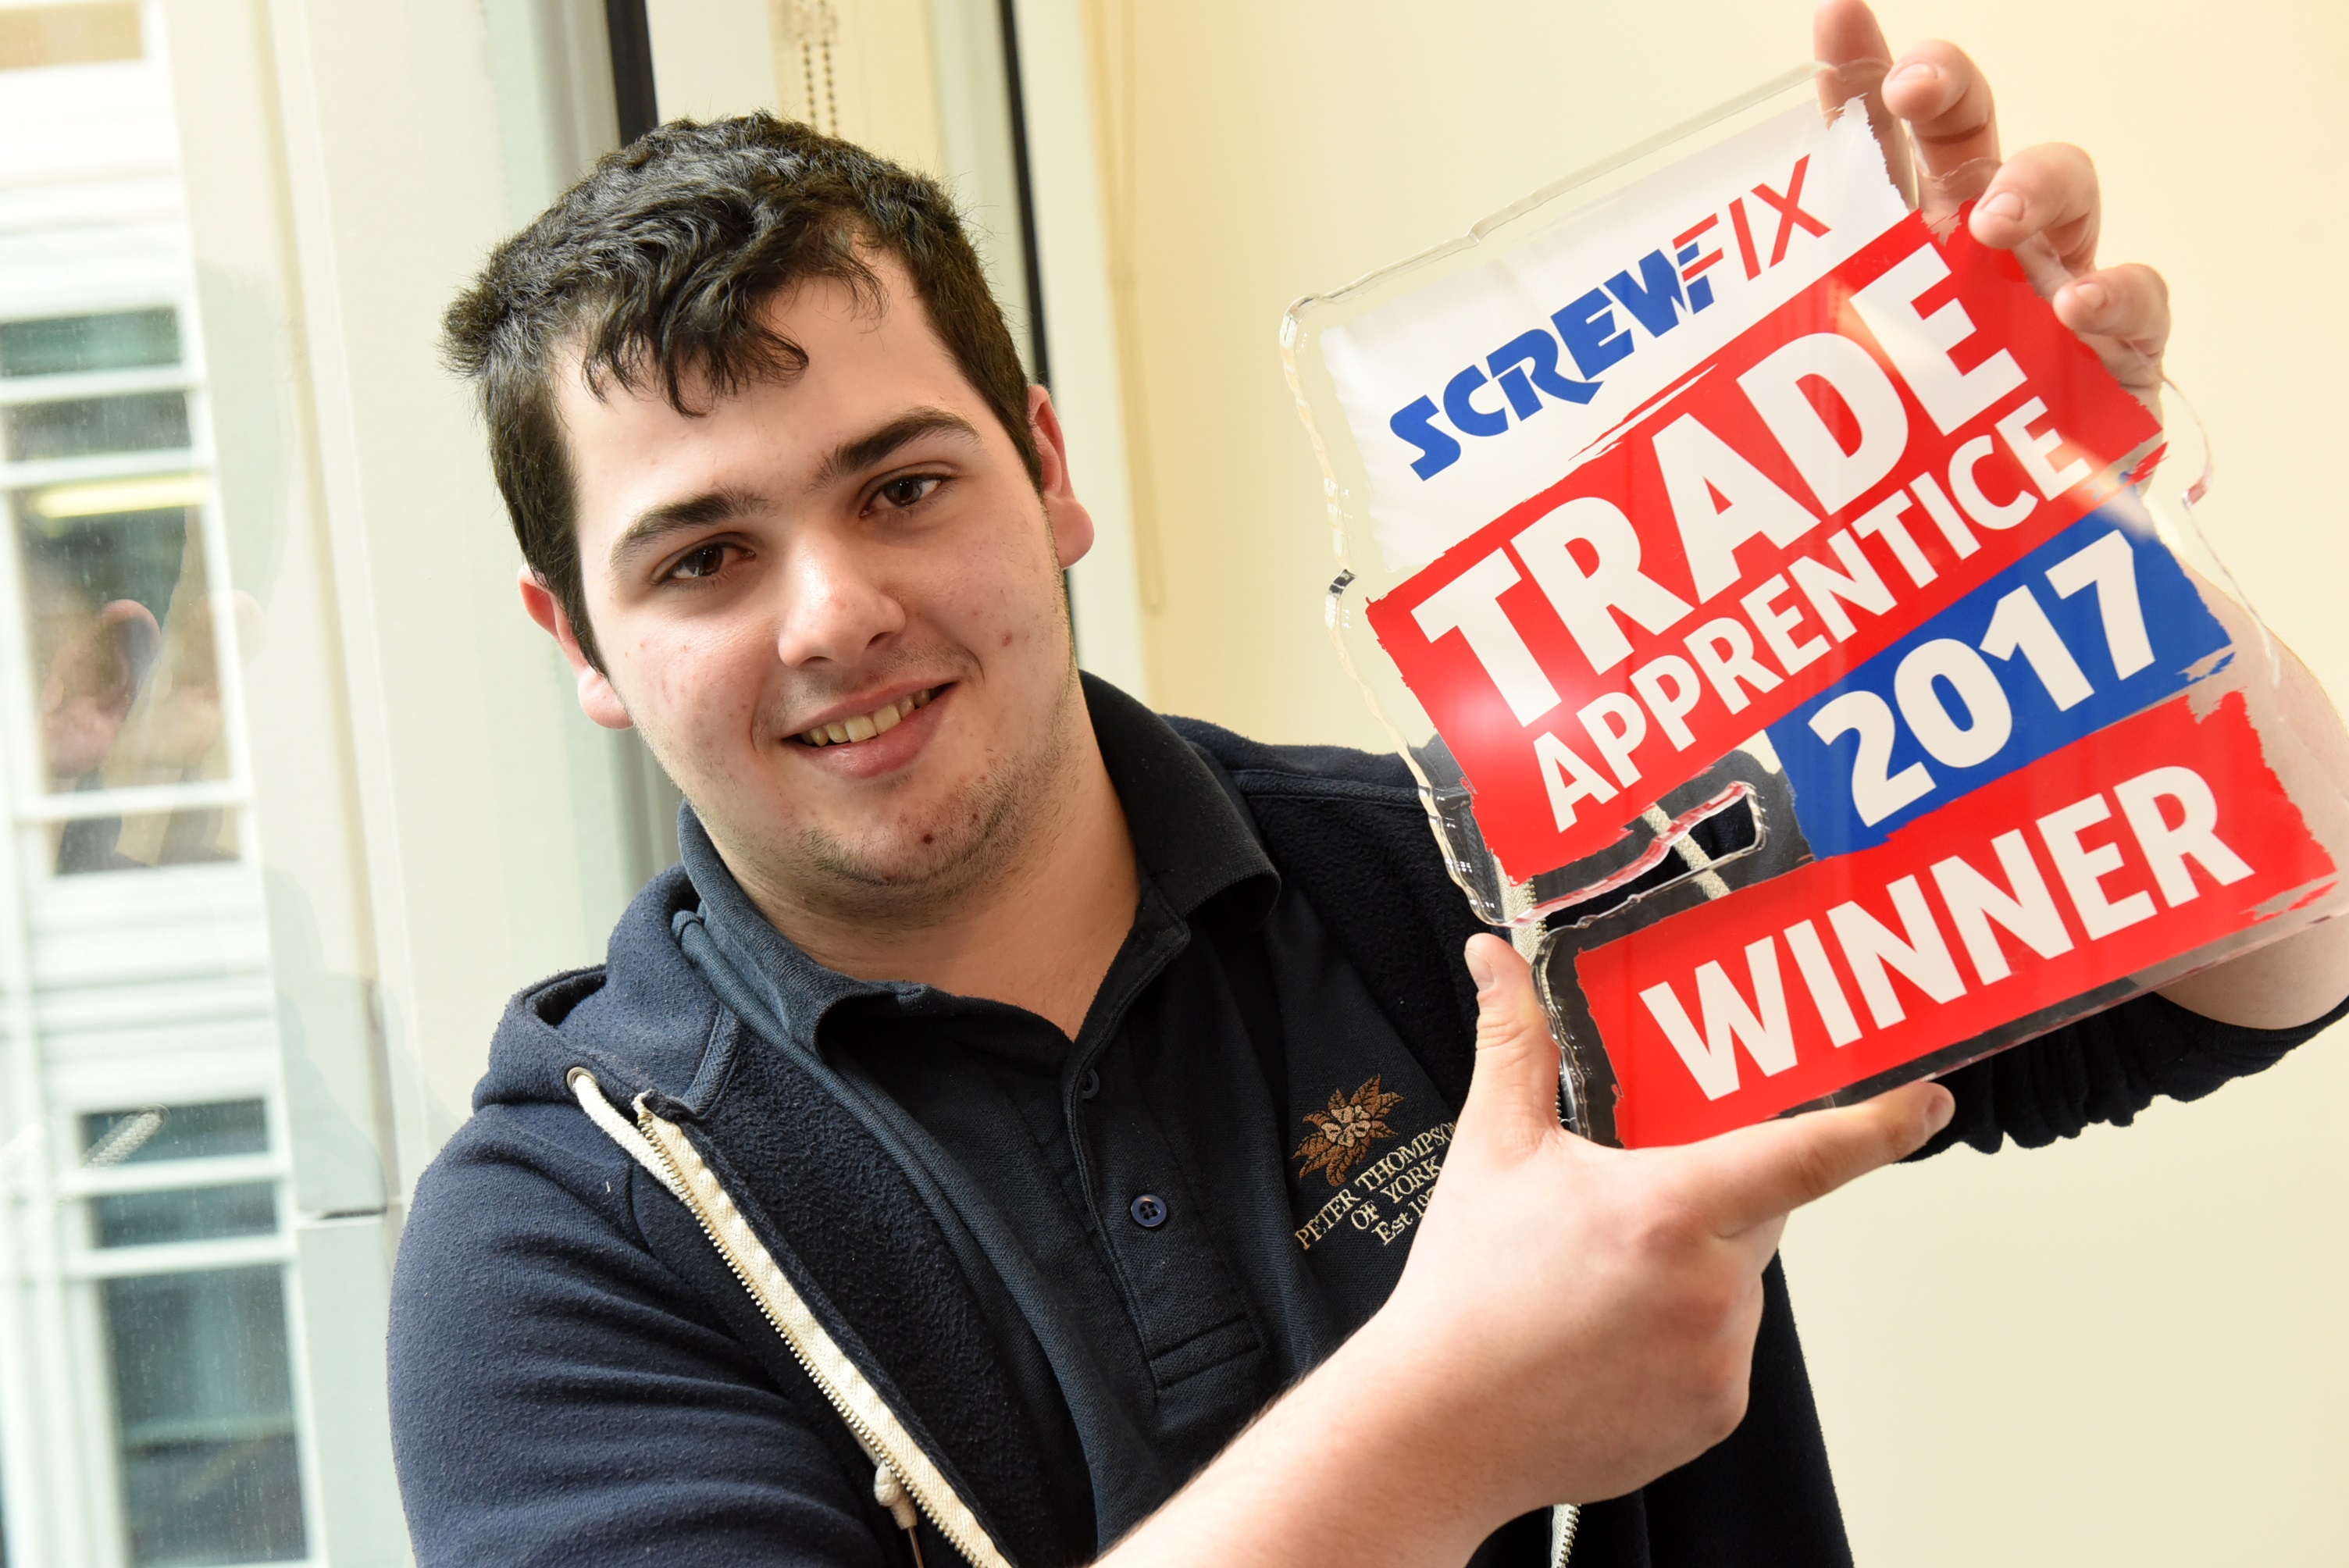 Bench joiner apprentice from Scarborough wins national competition